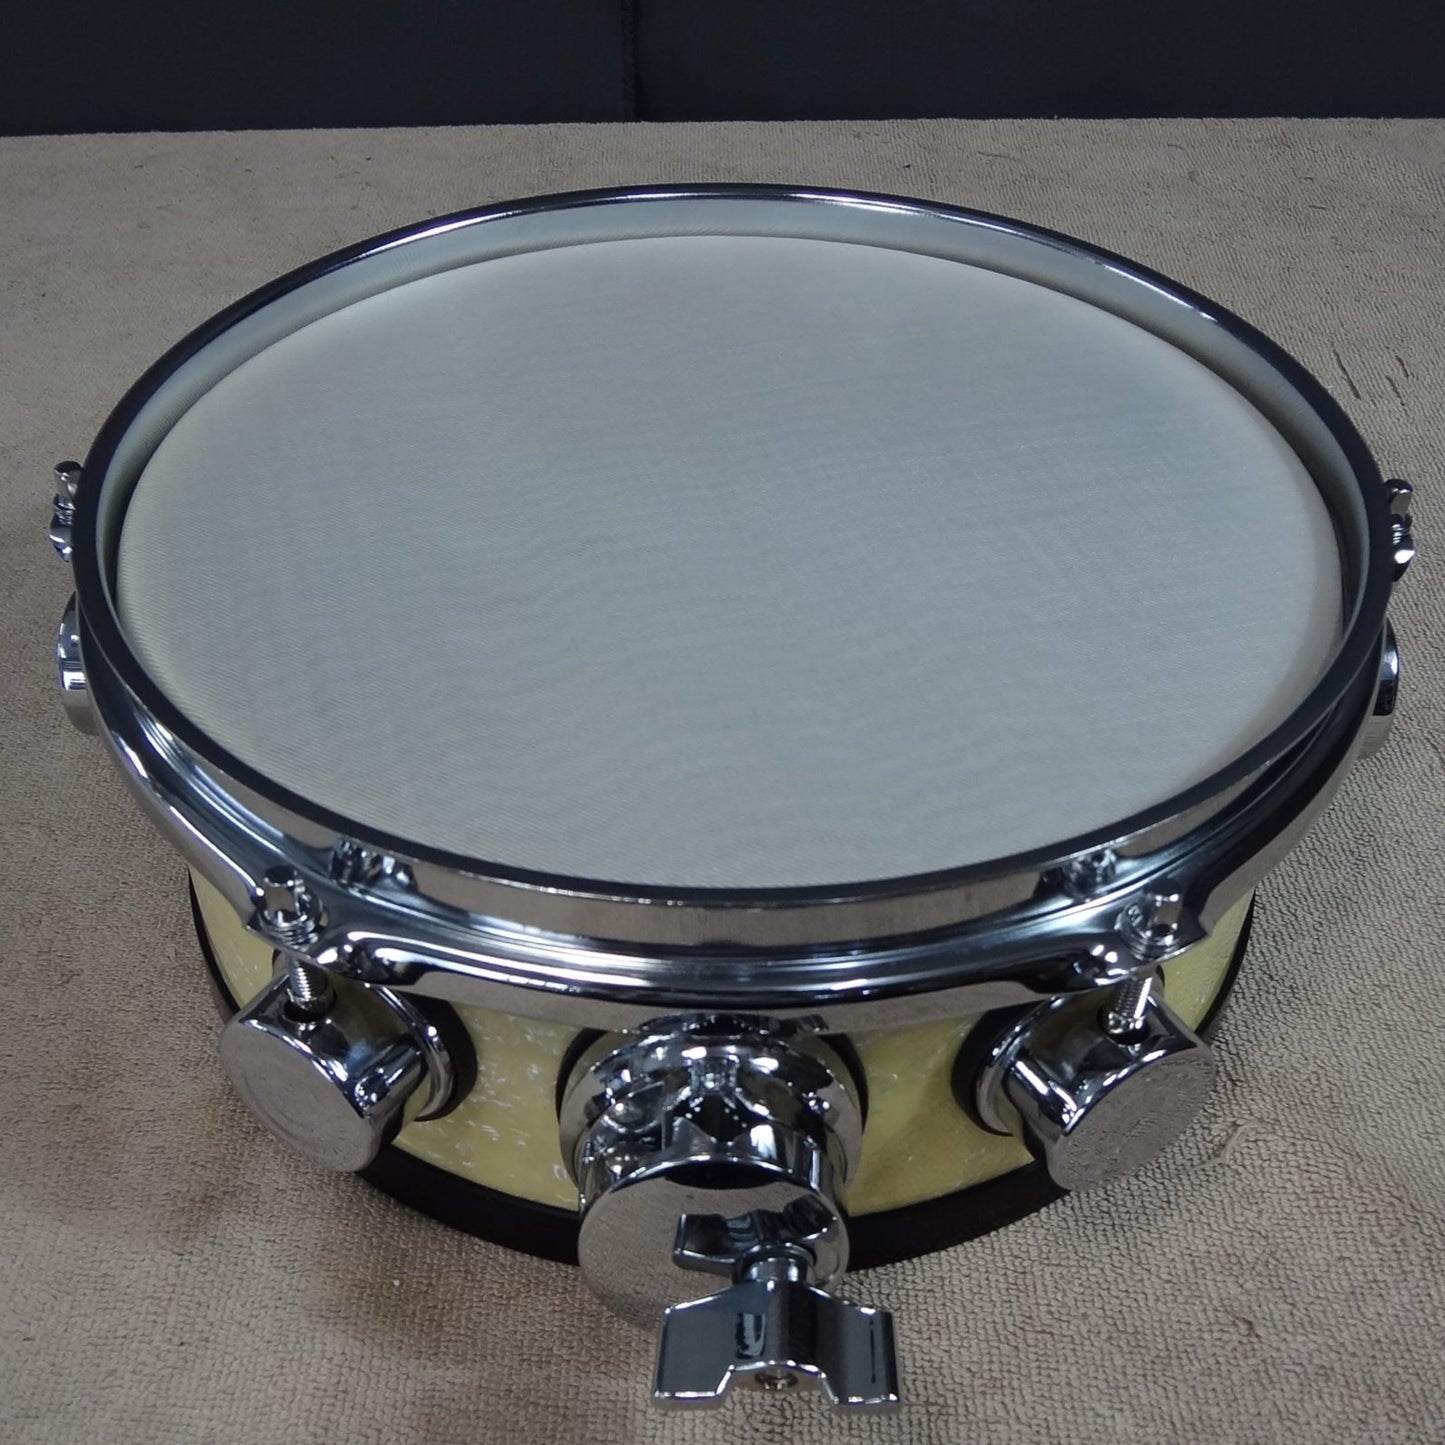 NEW 6 PIECE CUSTOM ELECTRONIC DRUM SHELL PACK - CREAM PEARL/VINTAGE